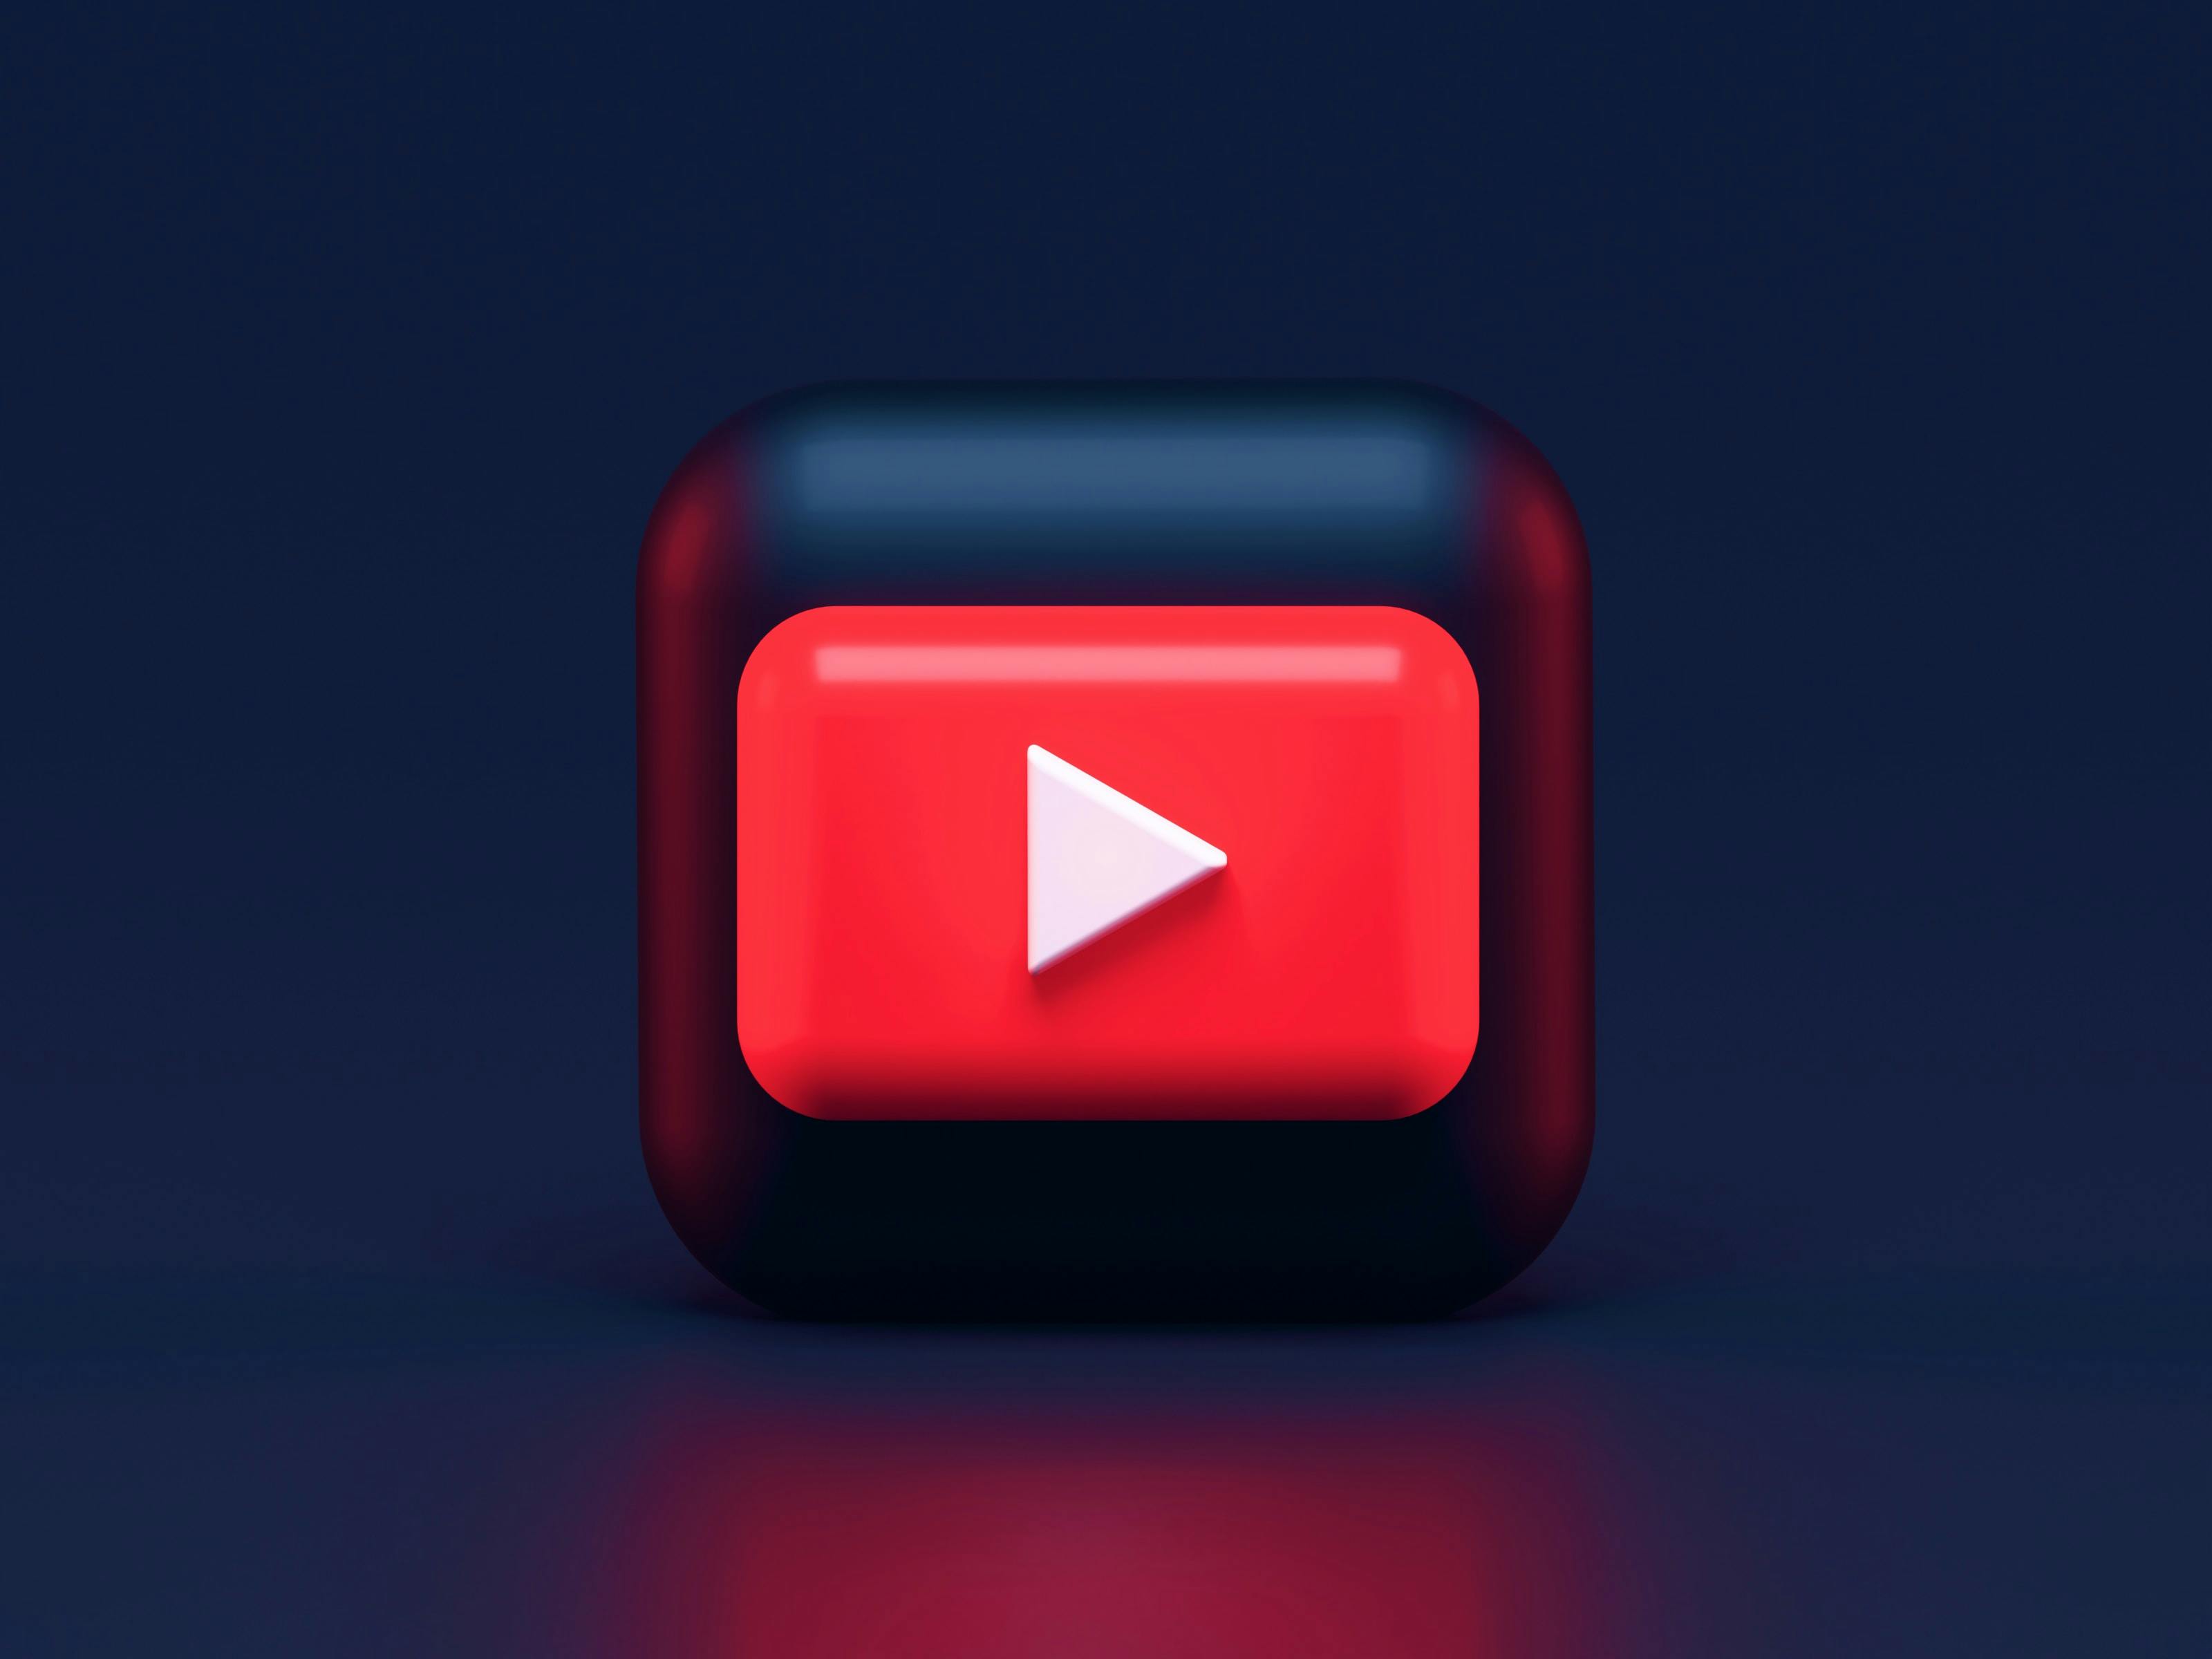 Cal.com Content Creator Program: Earn from Your YouTube Videos